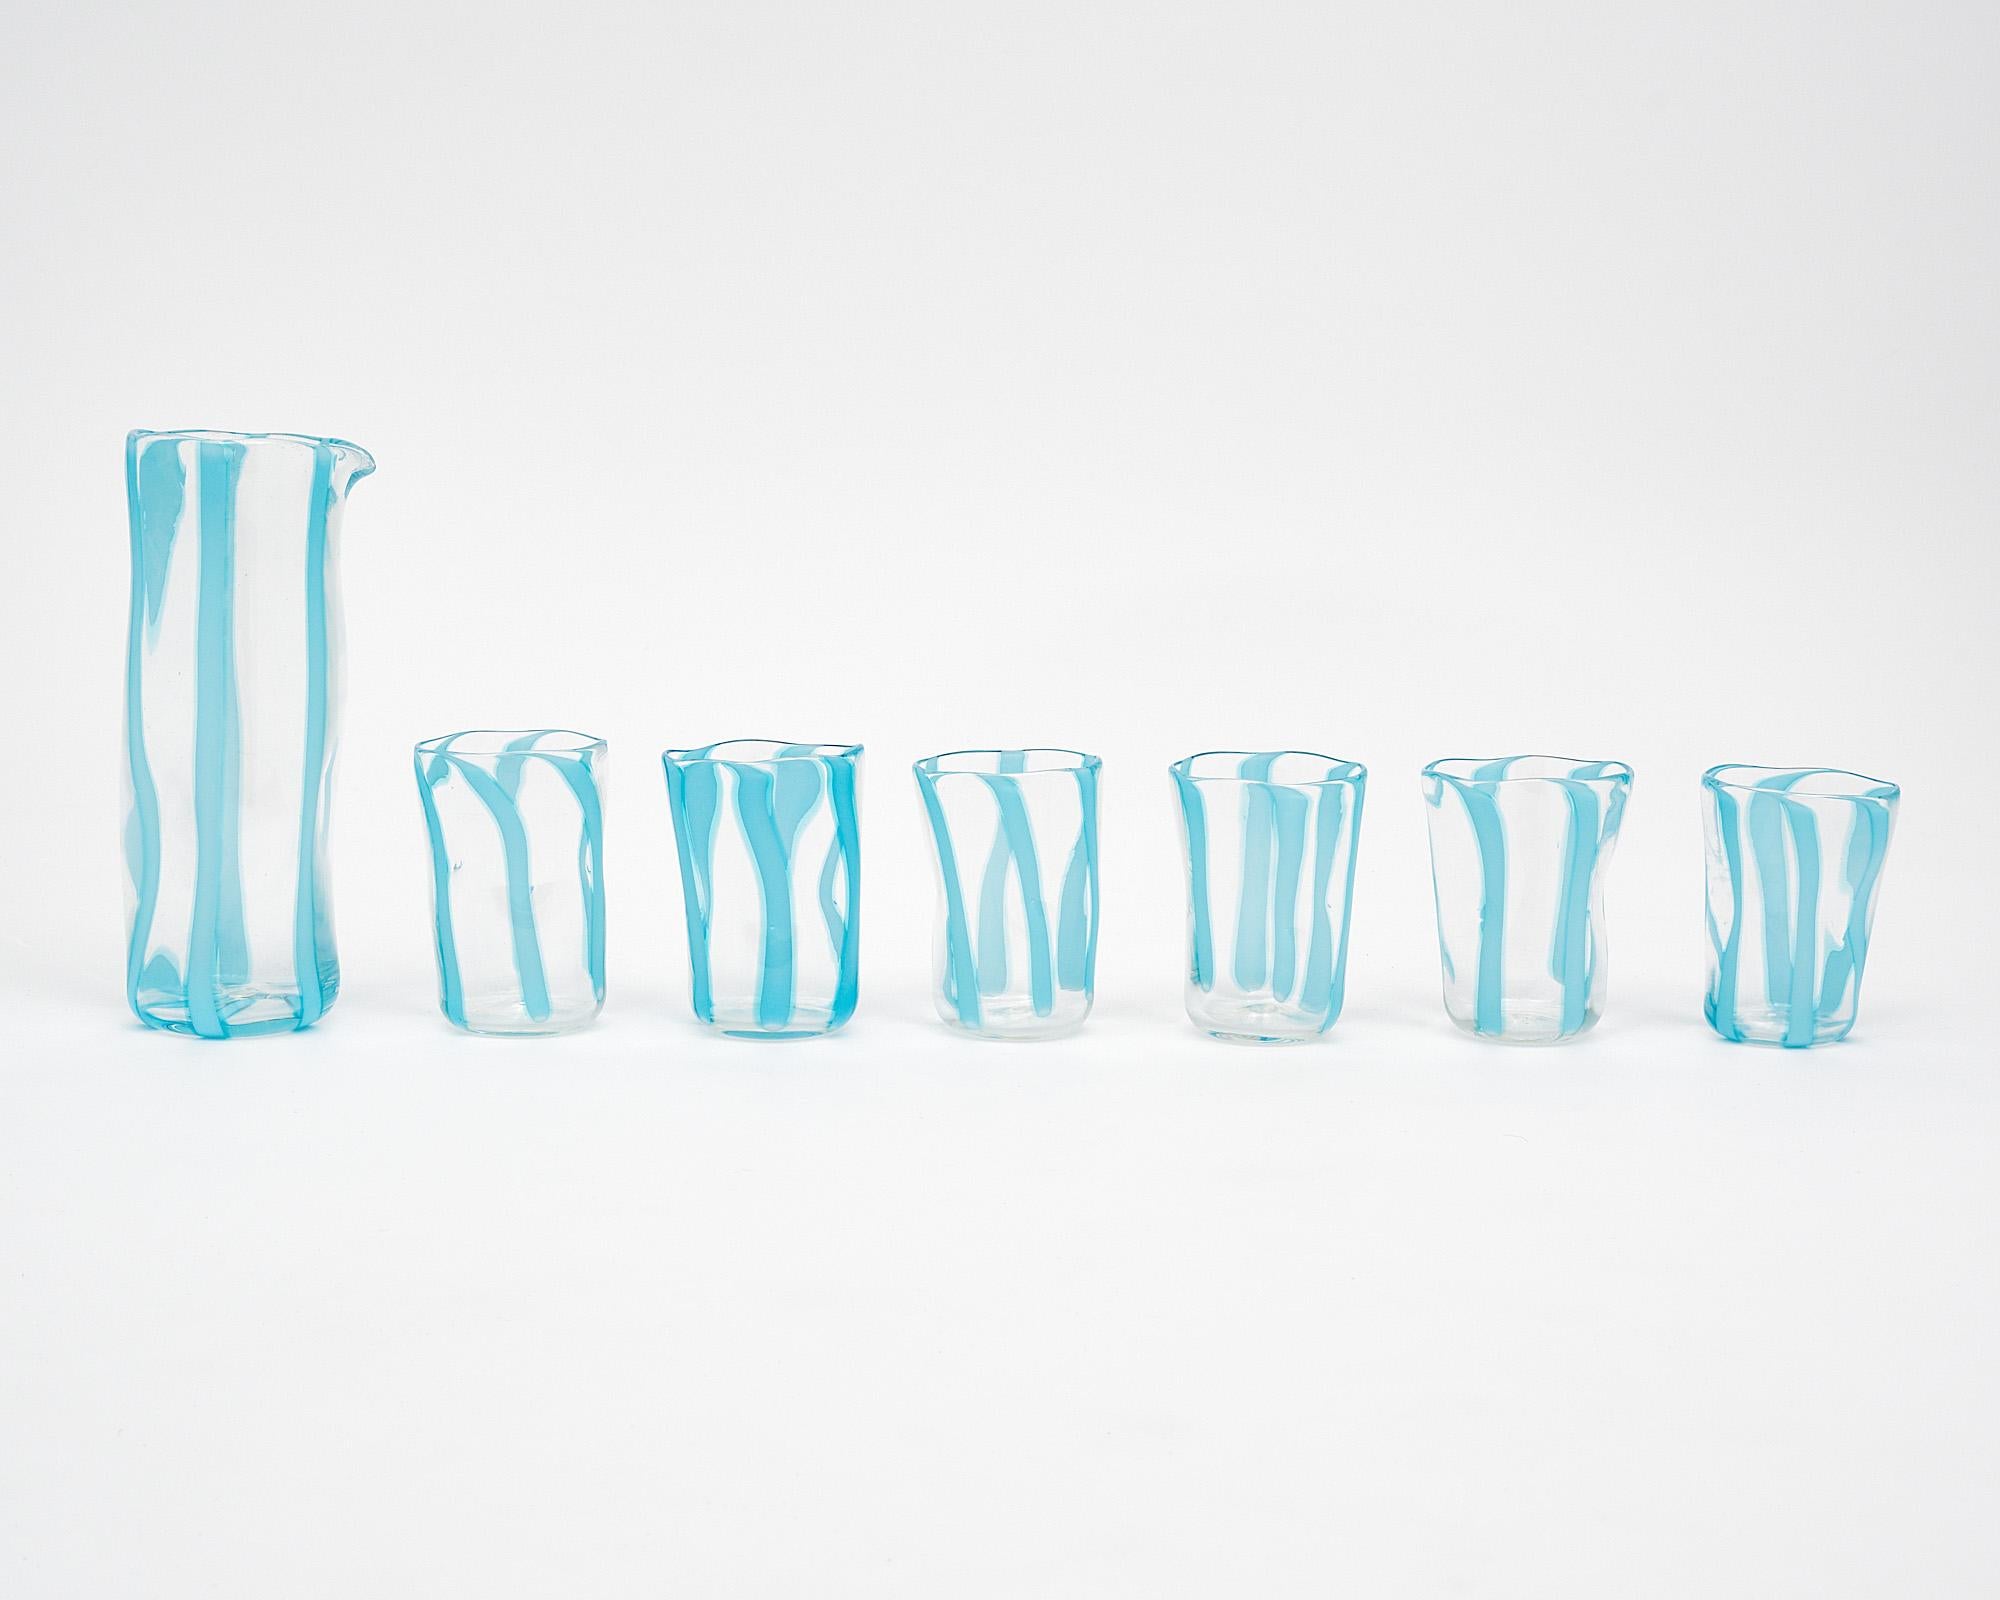 Set of six Murano glass cups and matching carafe. This set is made entirely of hand-blown glass on the island of Murano outside of Venice, Italy. They feature a transparent glass with sky blue stripes. We love the organic shapes and feel of this